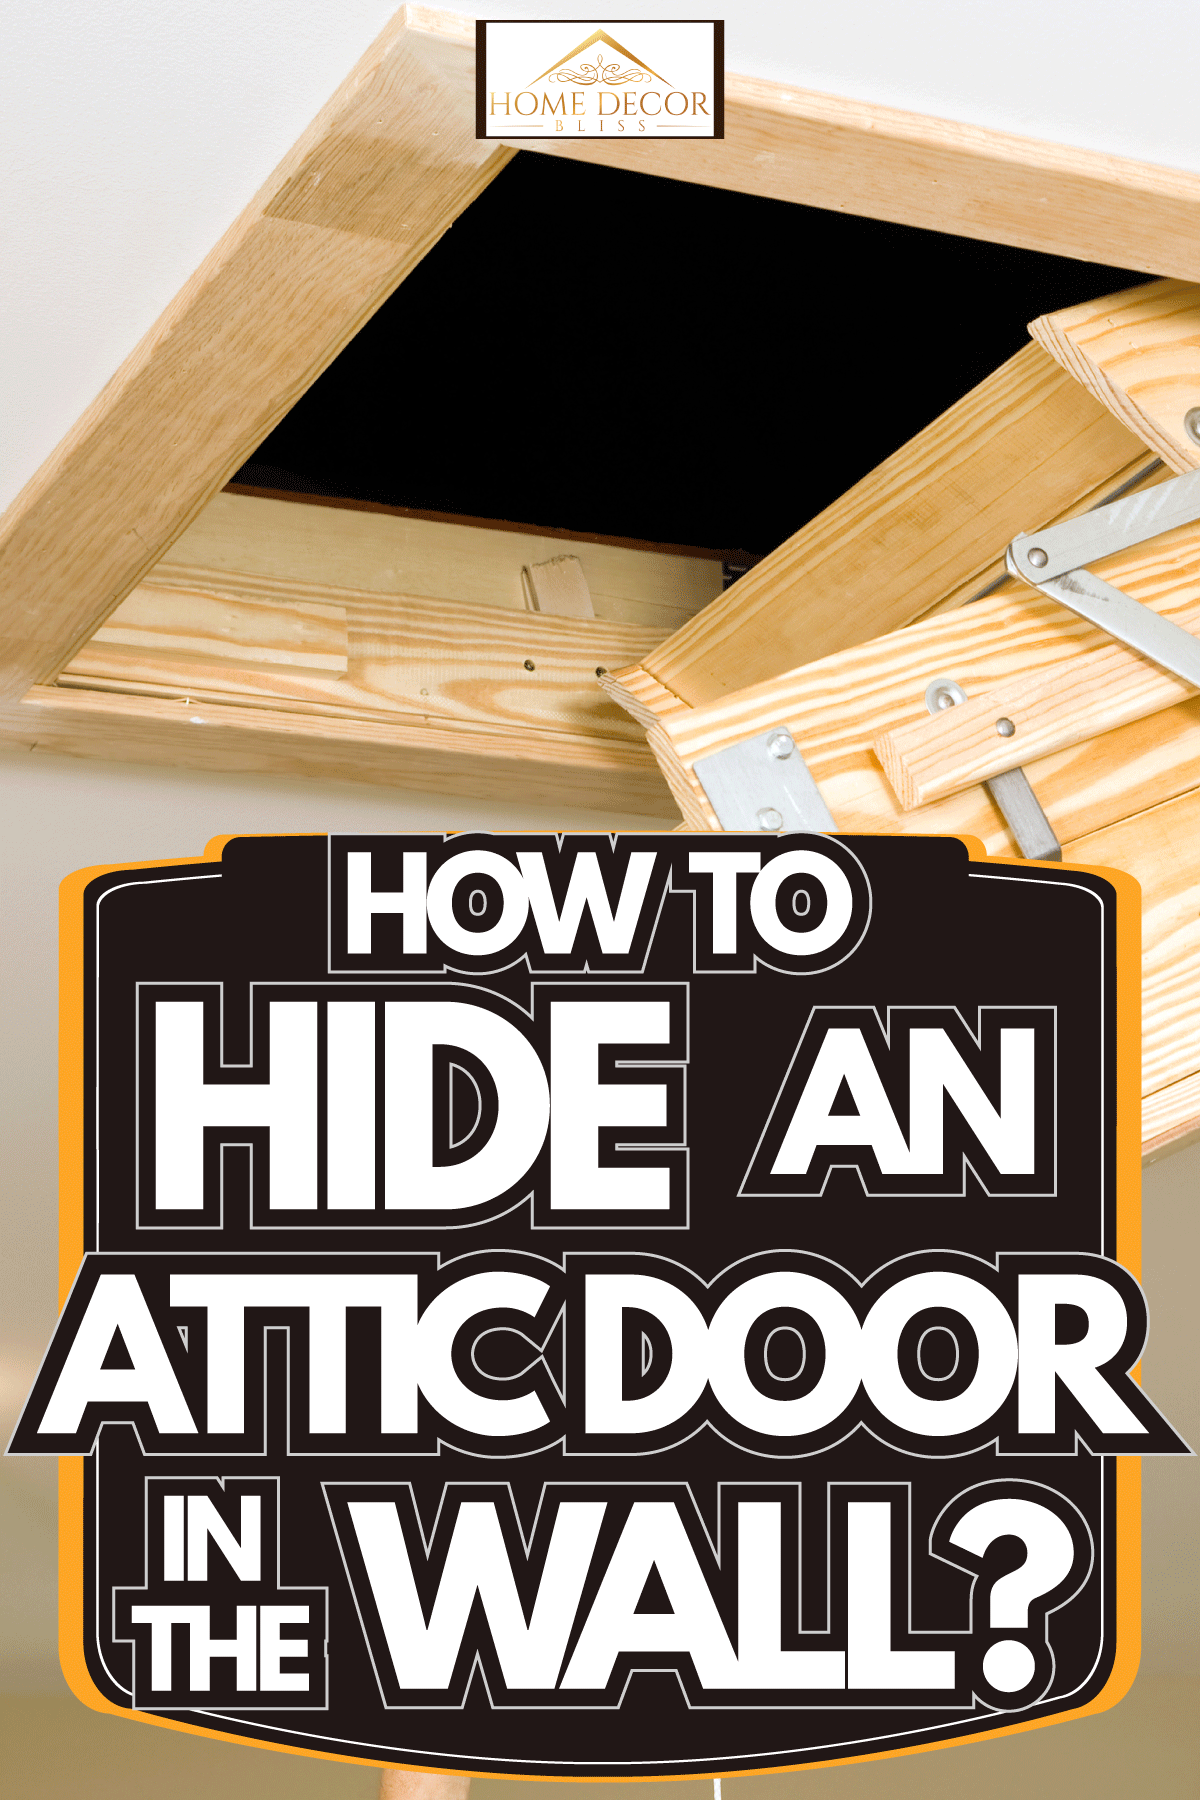 Attic Access in a modern house, How To Hide An Attic Door In The Wall?